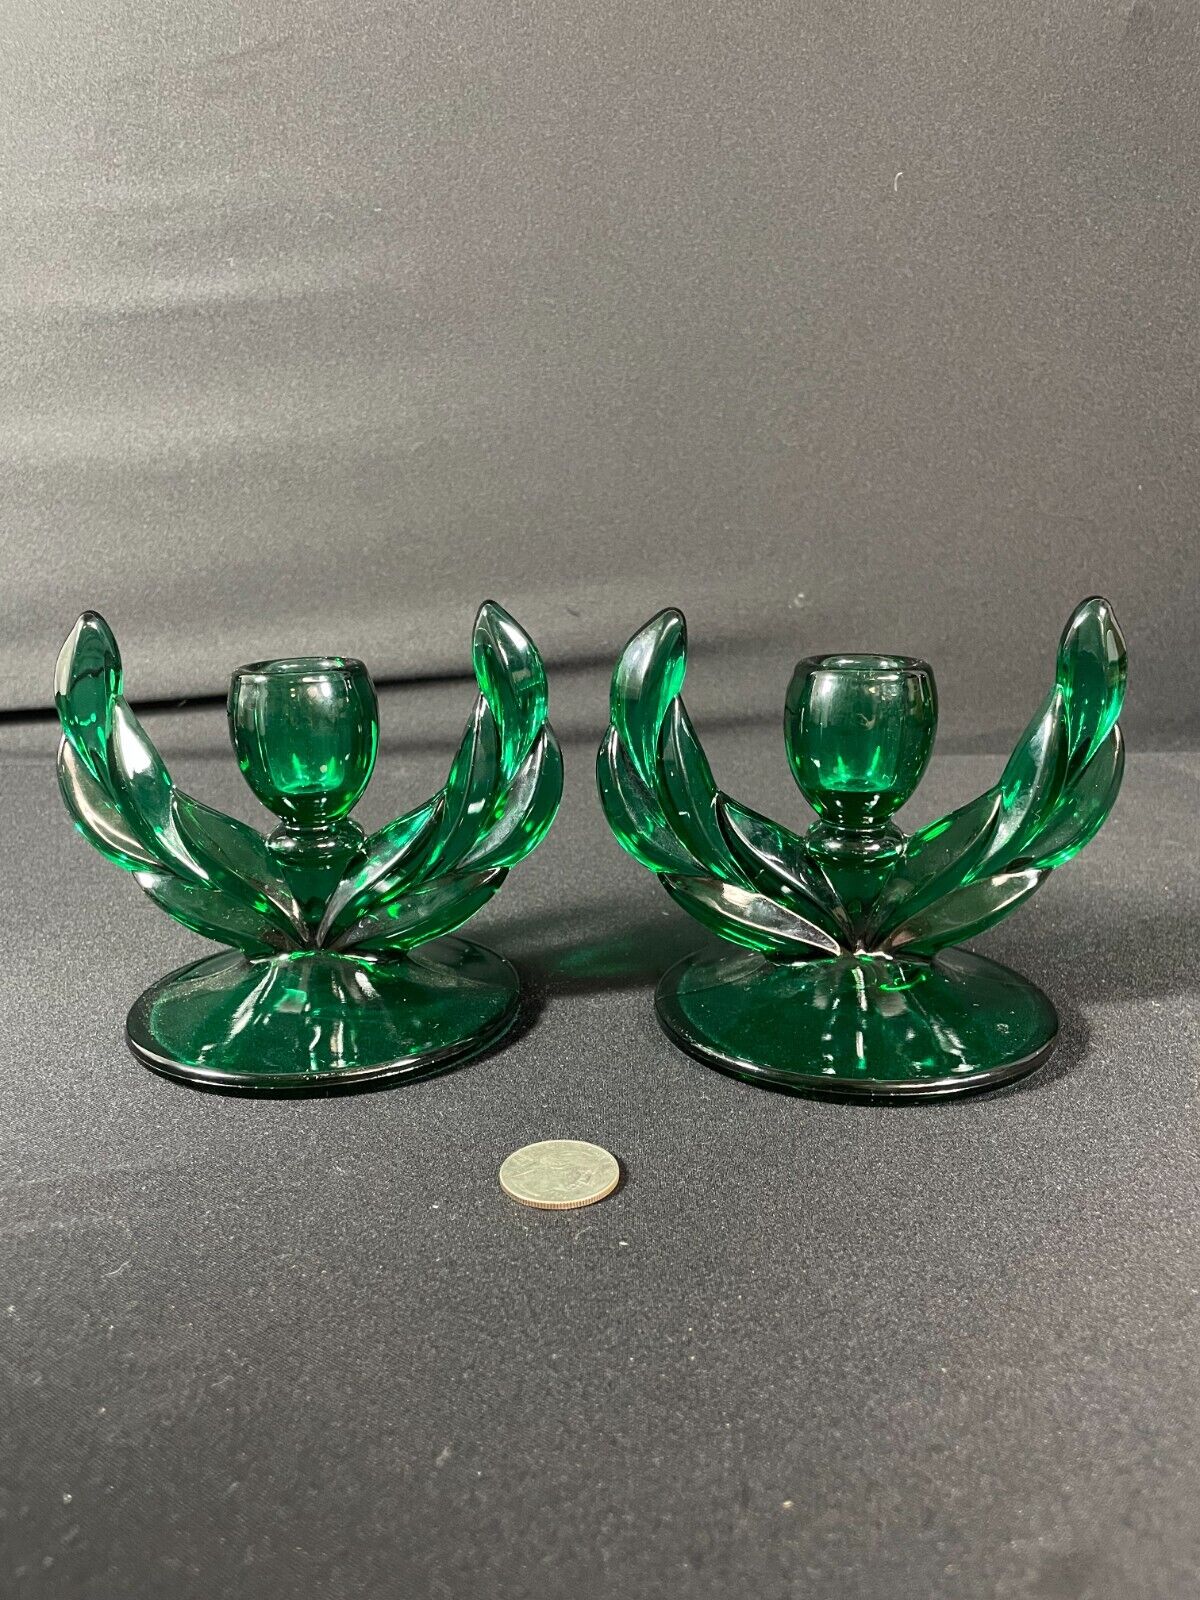 Emerald Green Winged Taper Glass Candle Holders (2)